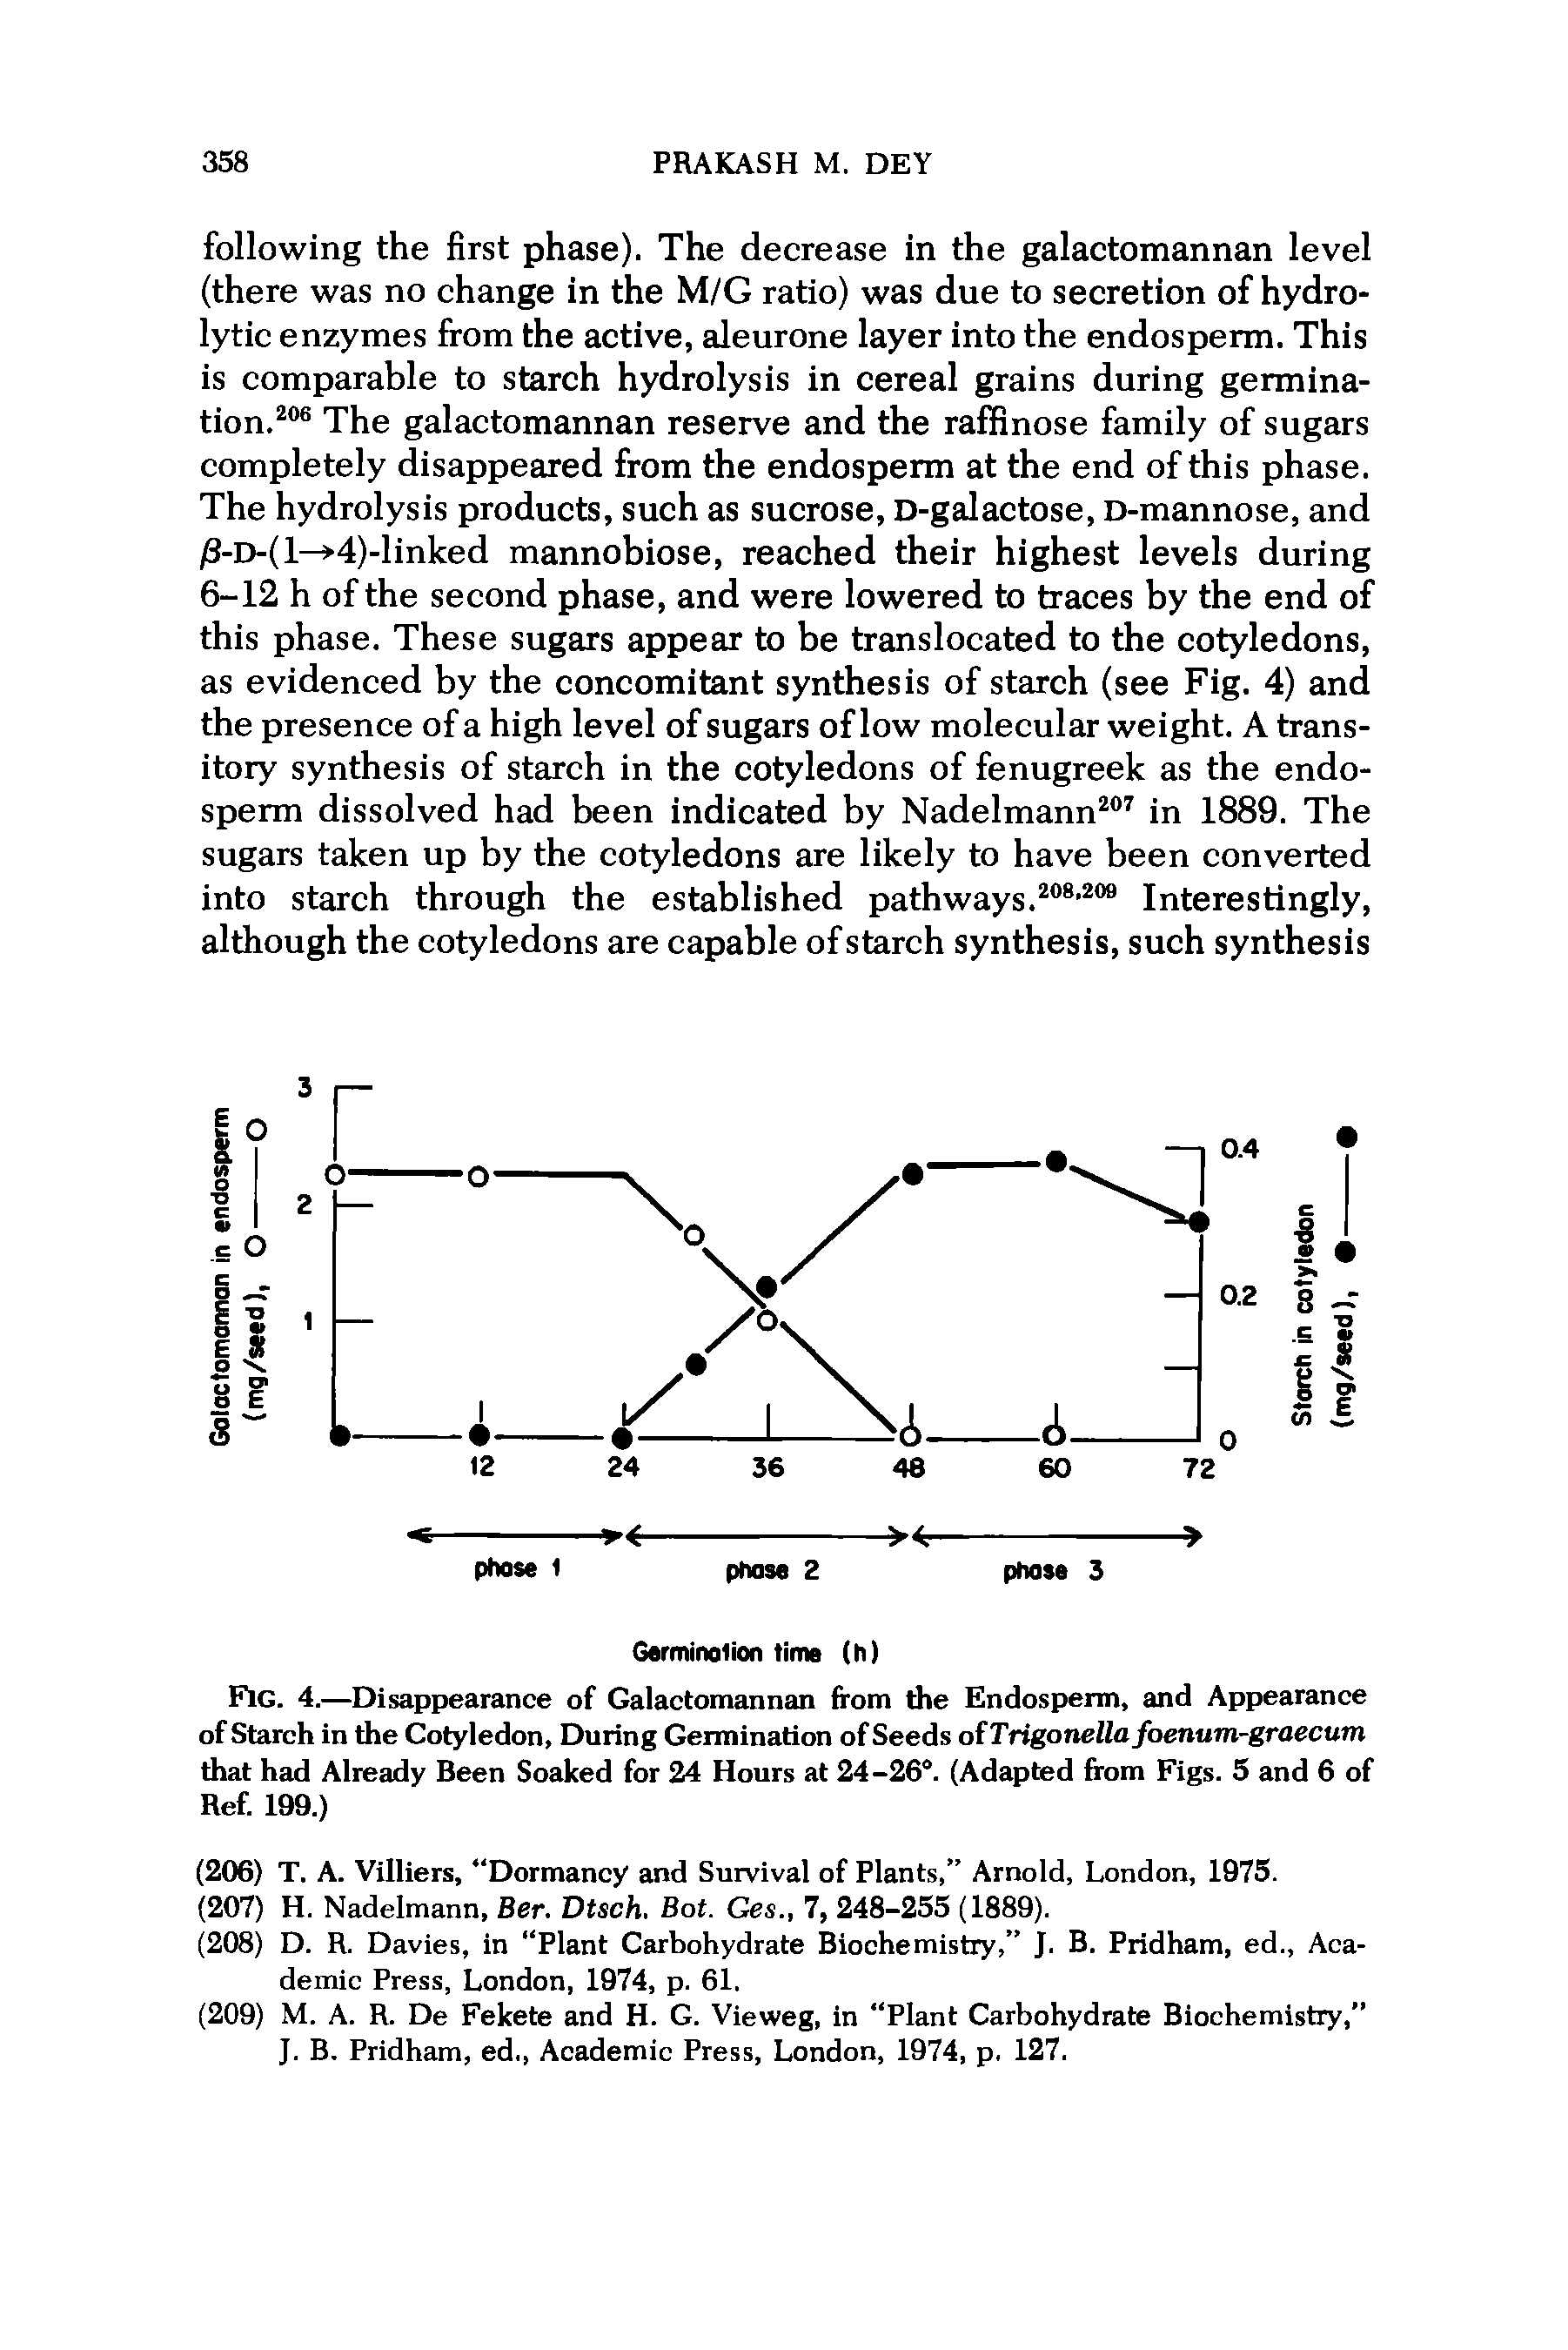 Fig. 4.—Disappearance of Galactomannan from the Endosperm, and Appearance of Starch in the Cotyledon, During Germination of Seeds olTriganella foenum-graecum that had Already Been Soaked for 24 Hours at 24-26°. (Adapted from Figs. 5 and 6 of Ref. 199.)...